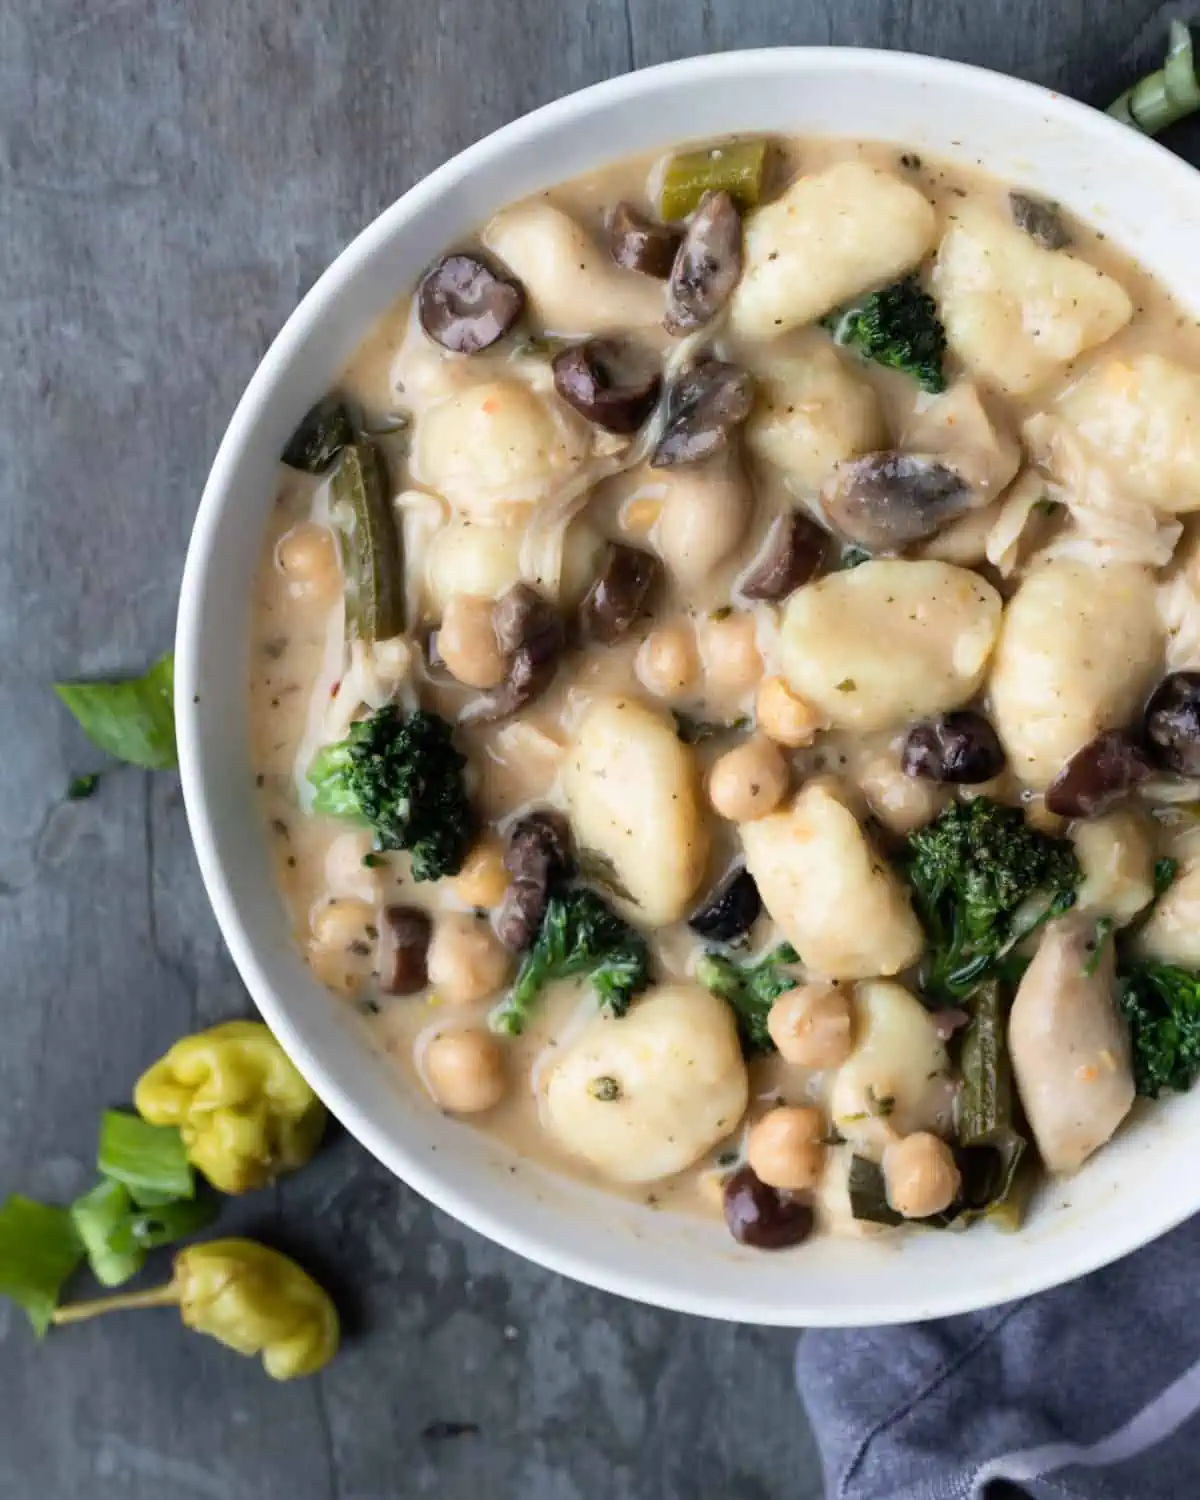 Delicious vegan gnocchi dish served in a bowl, featuring a creamy sauce, broccolini, mushrooms, and chickpeas